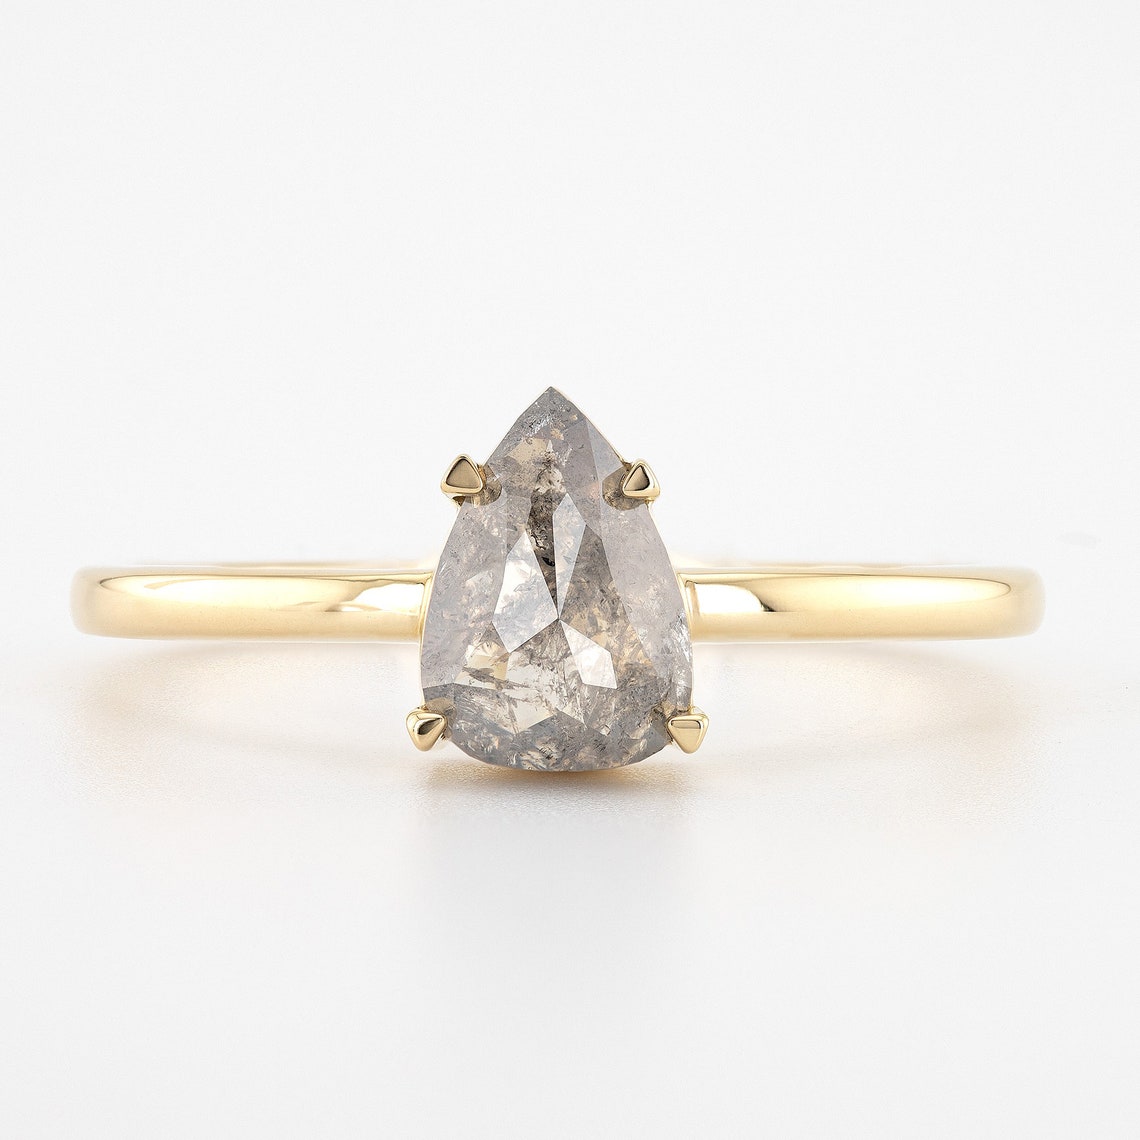 Appropriate 1.25CT Pear Diamond Engagement Ring